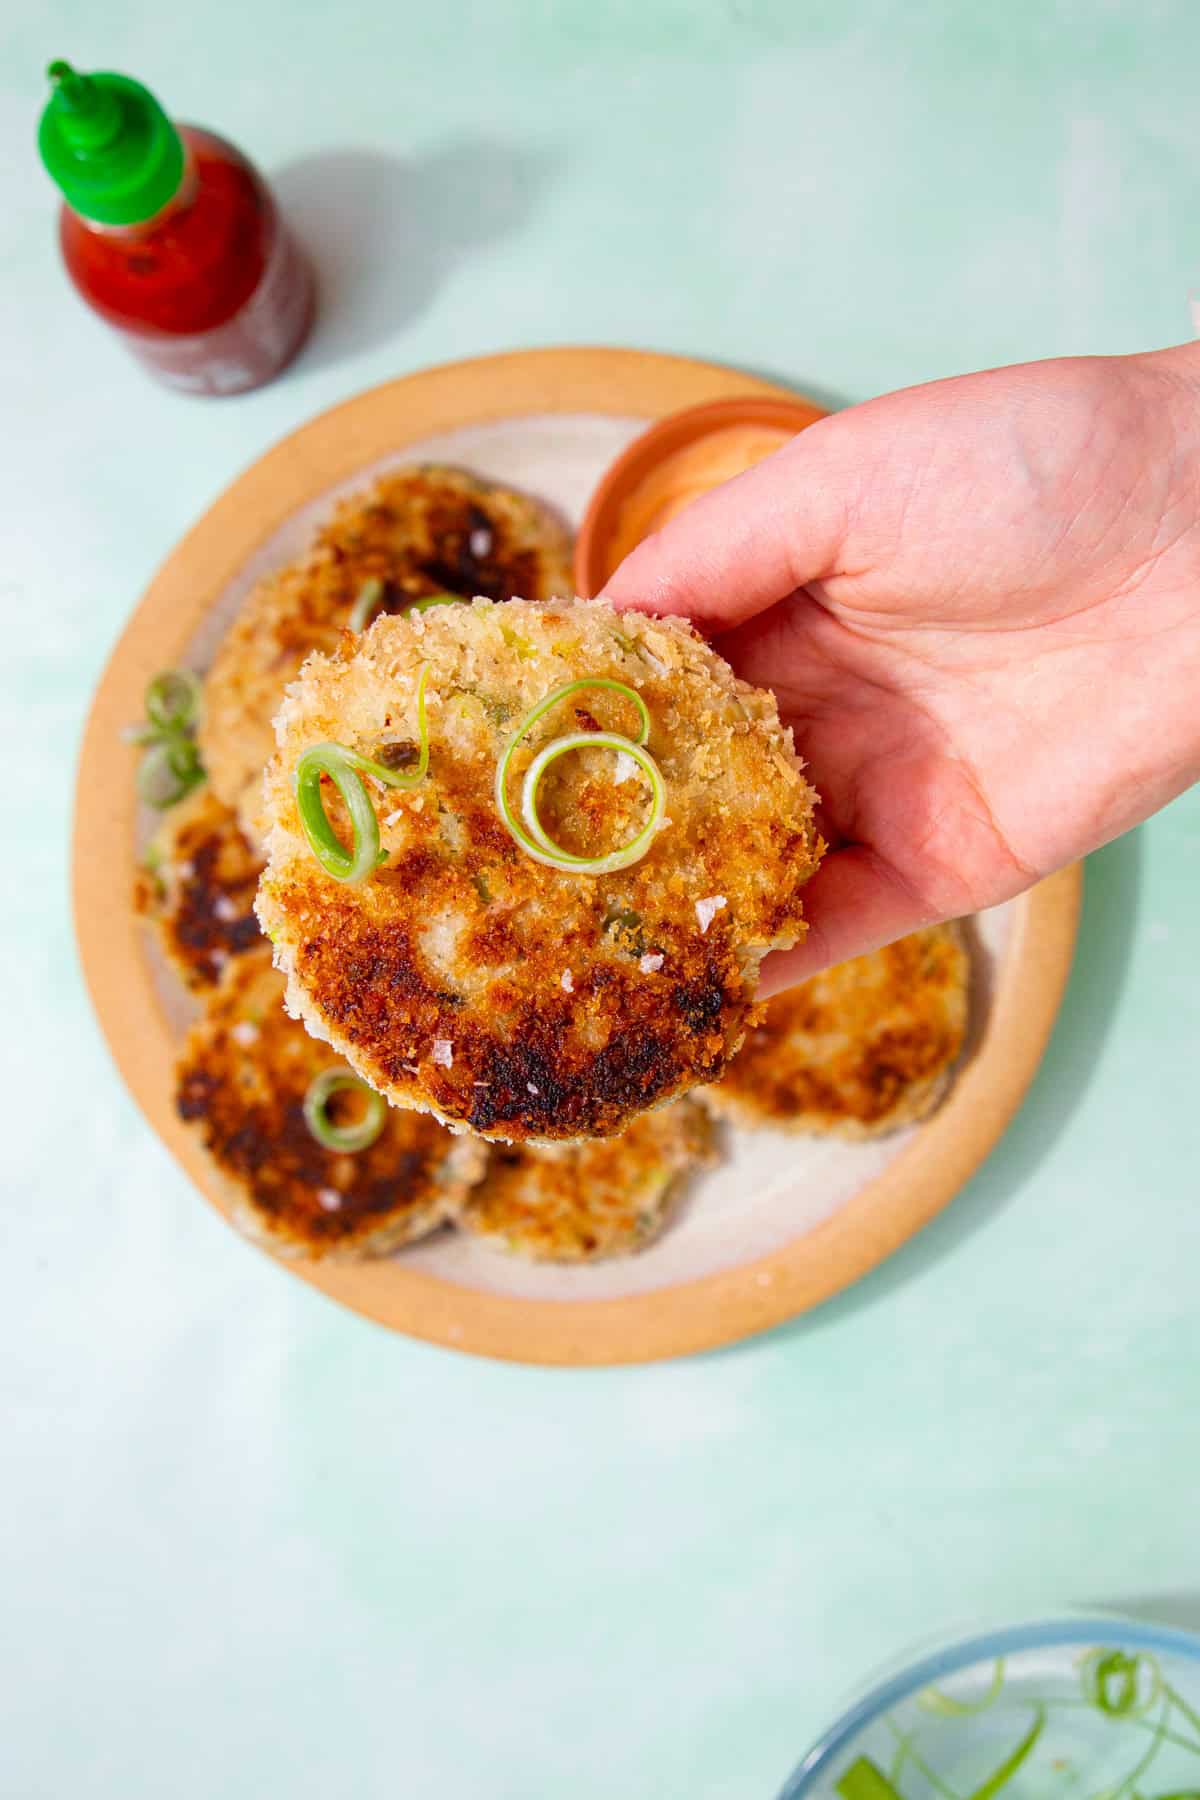 A golden browned fishcake held in a hand over a plate of fishcakes with spirals of spring onion and a sauce container next to the plate.